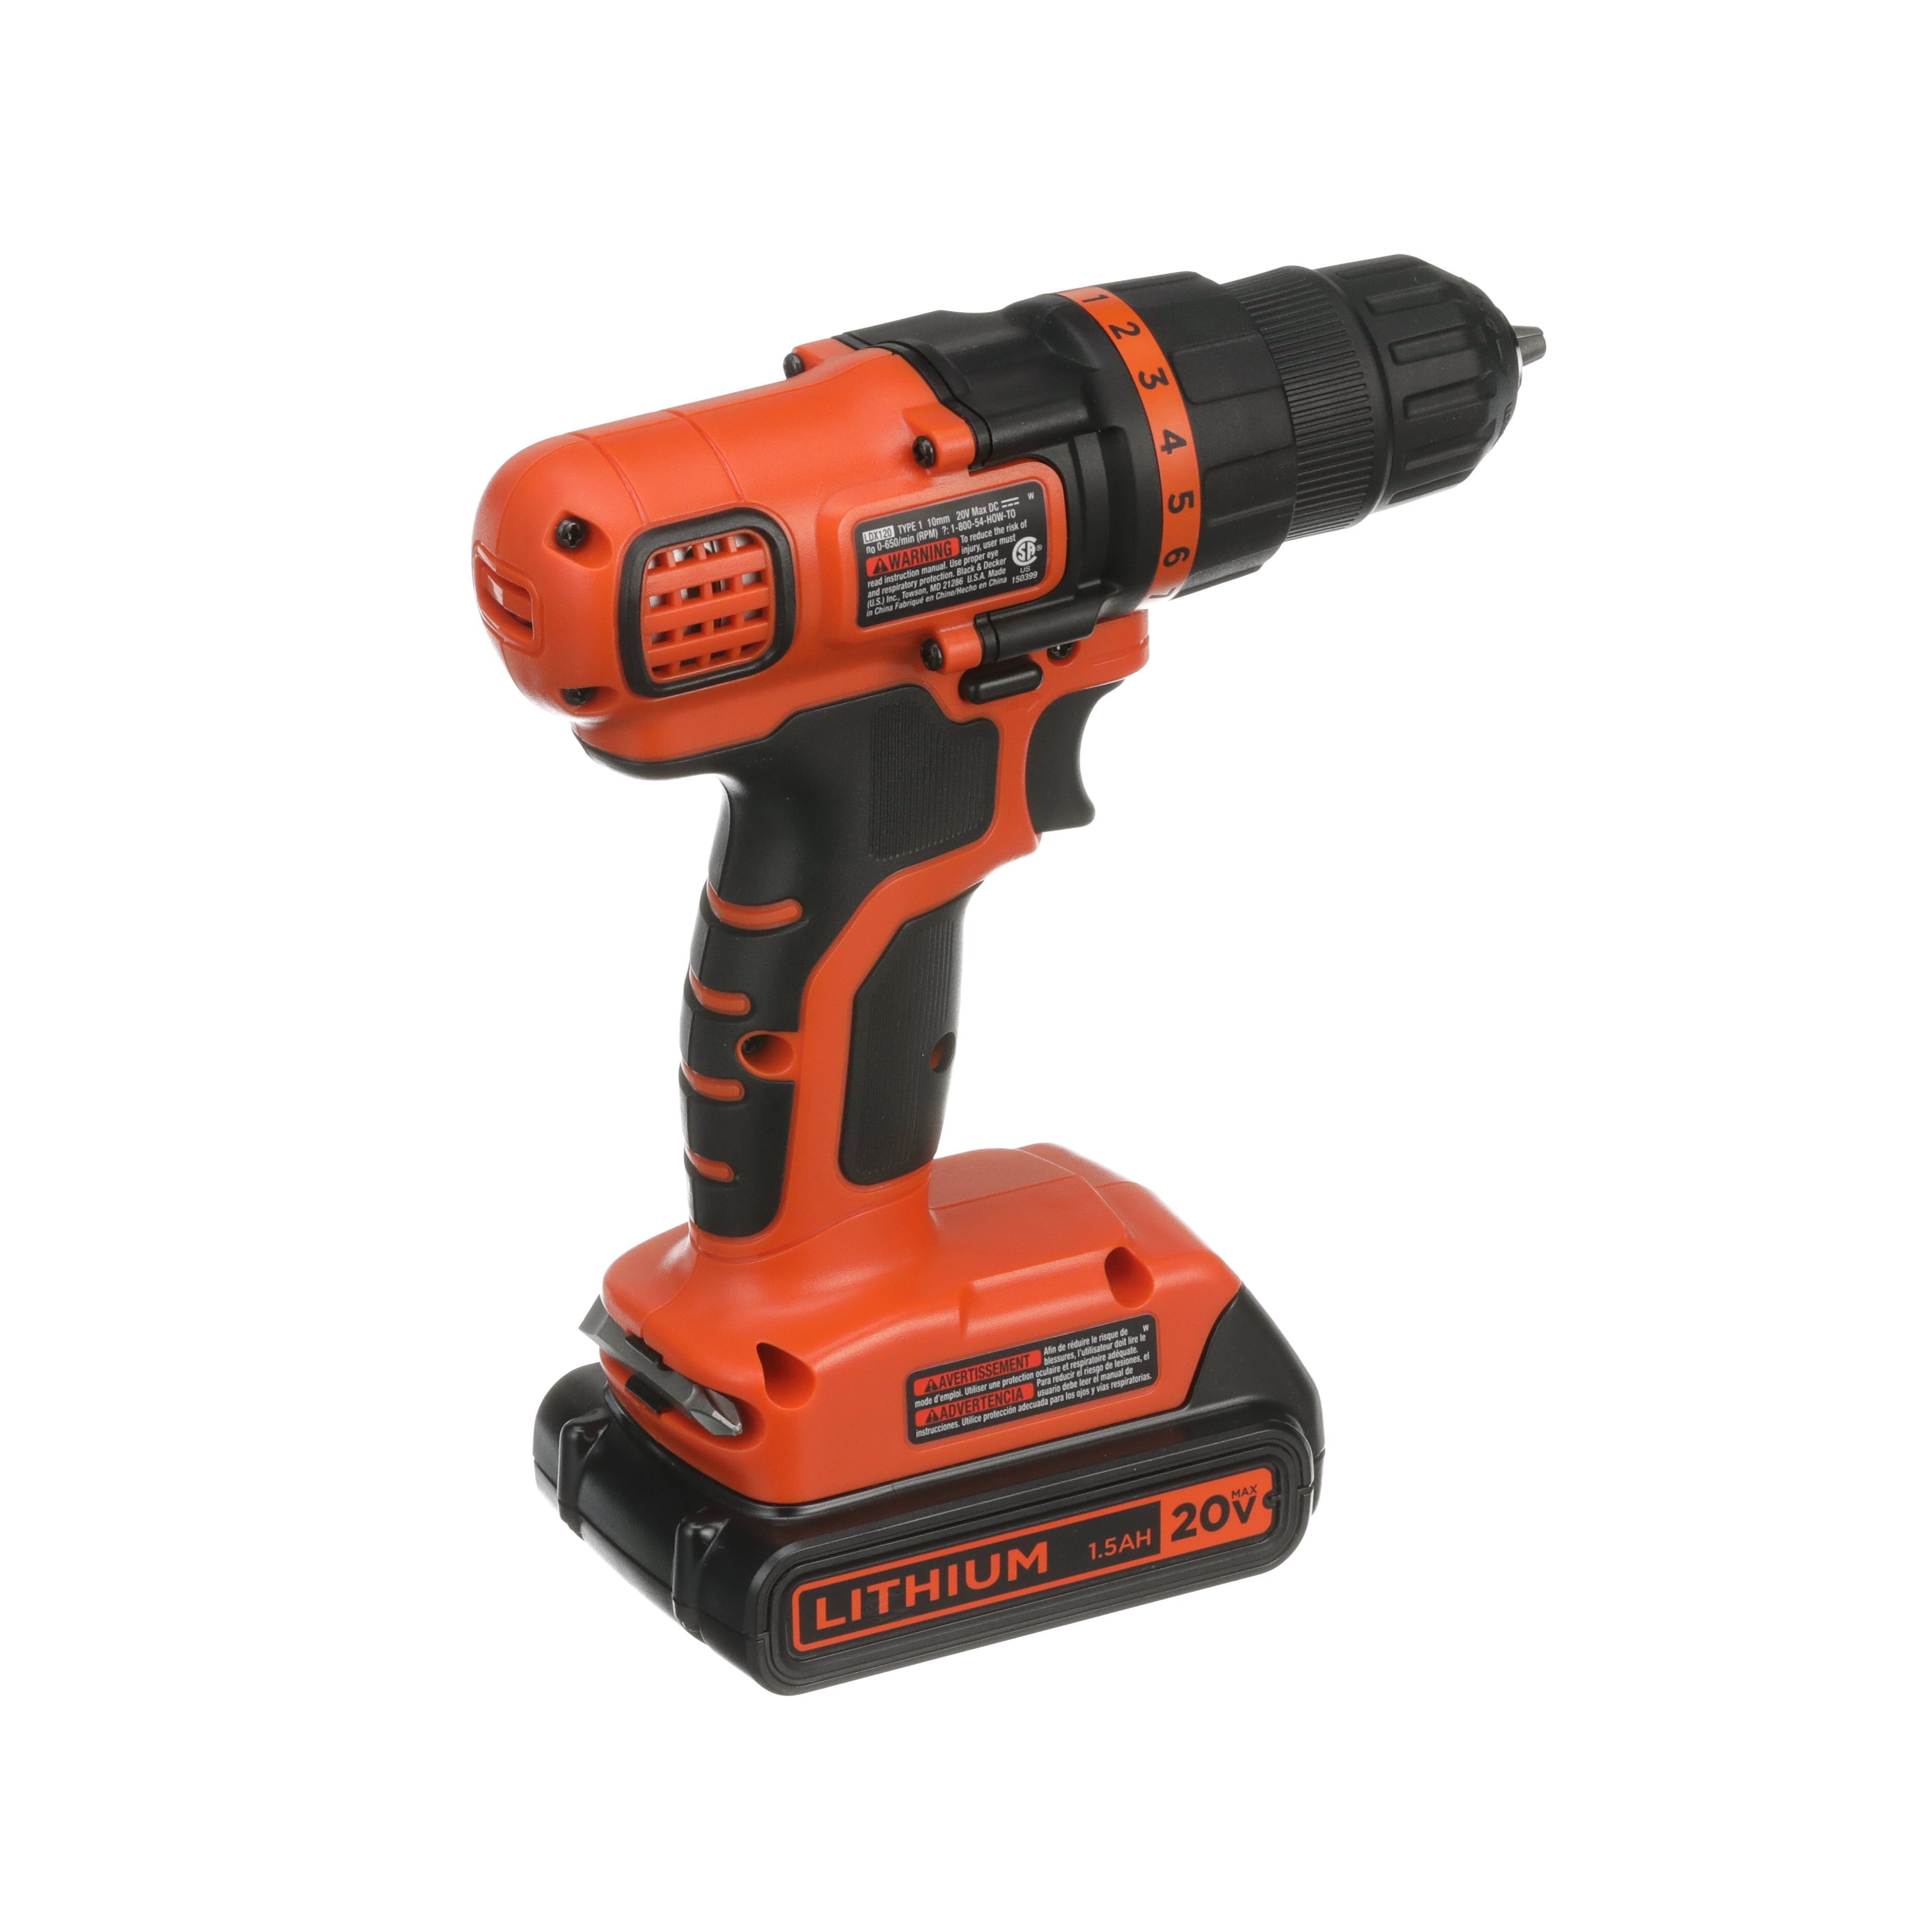 Black+decker LBXR20CK 20V Max Lithium-Ion Battery and Charger